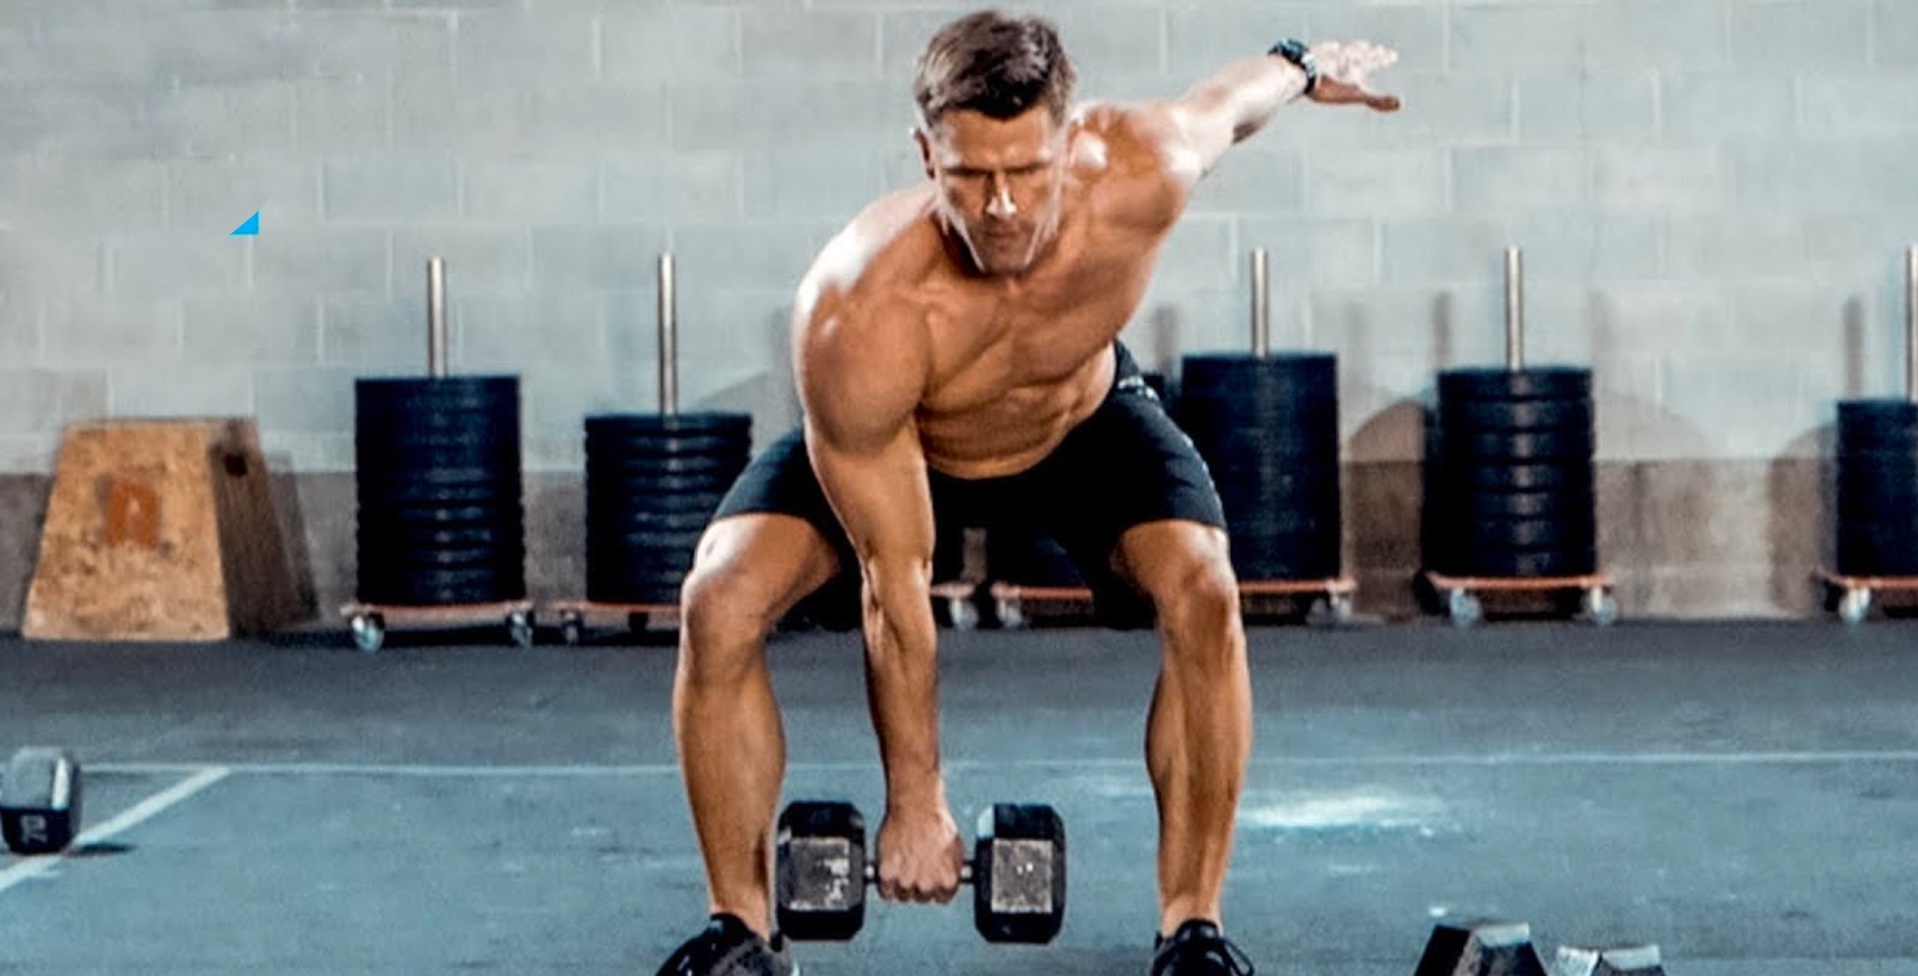 This circuit dumbbell workout with 12 million views will build